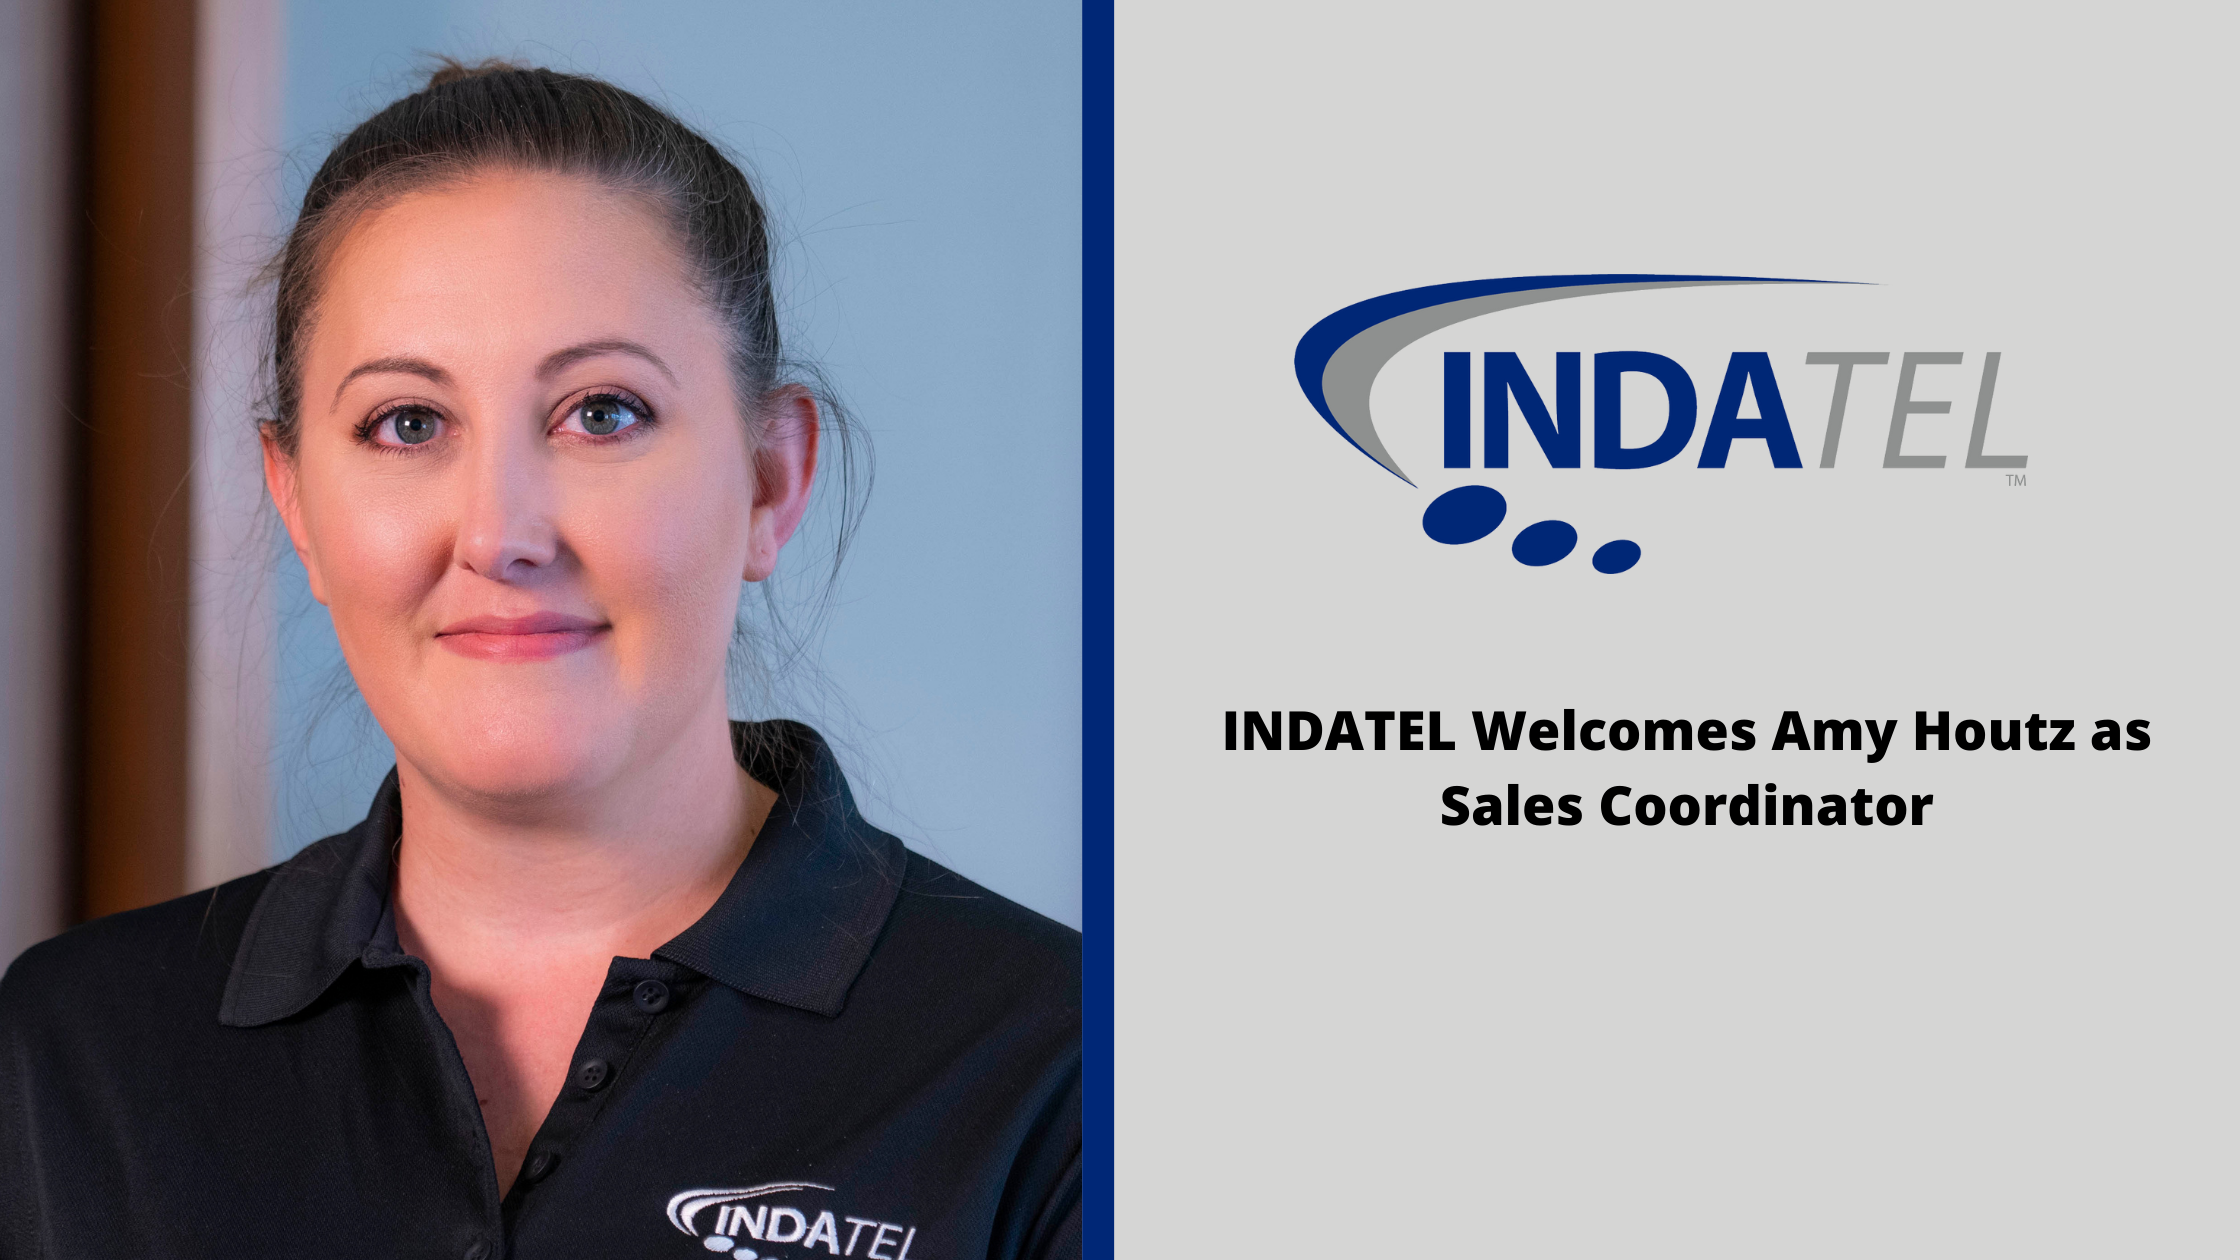 INDATEL Welcomes Amy Houtz as Sales Coordinator featured image